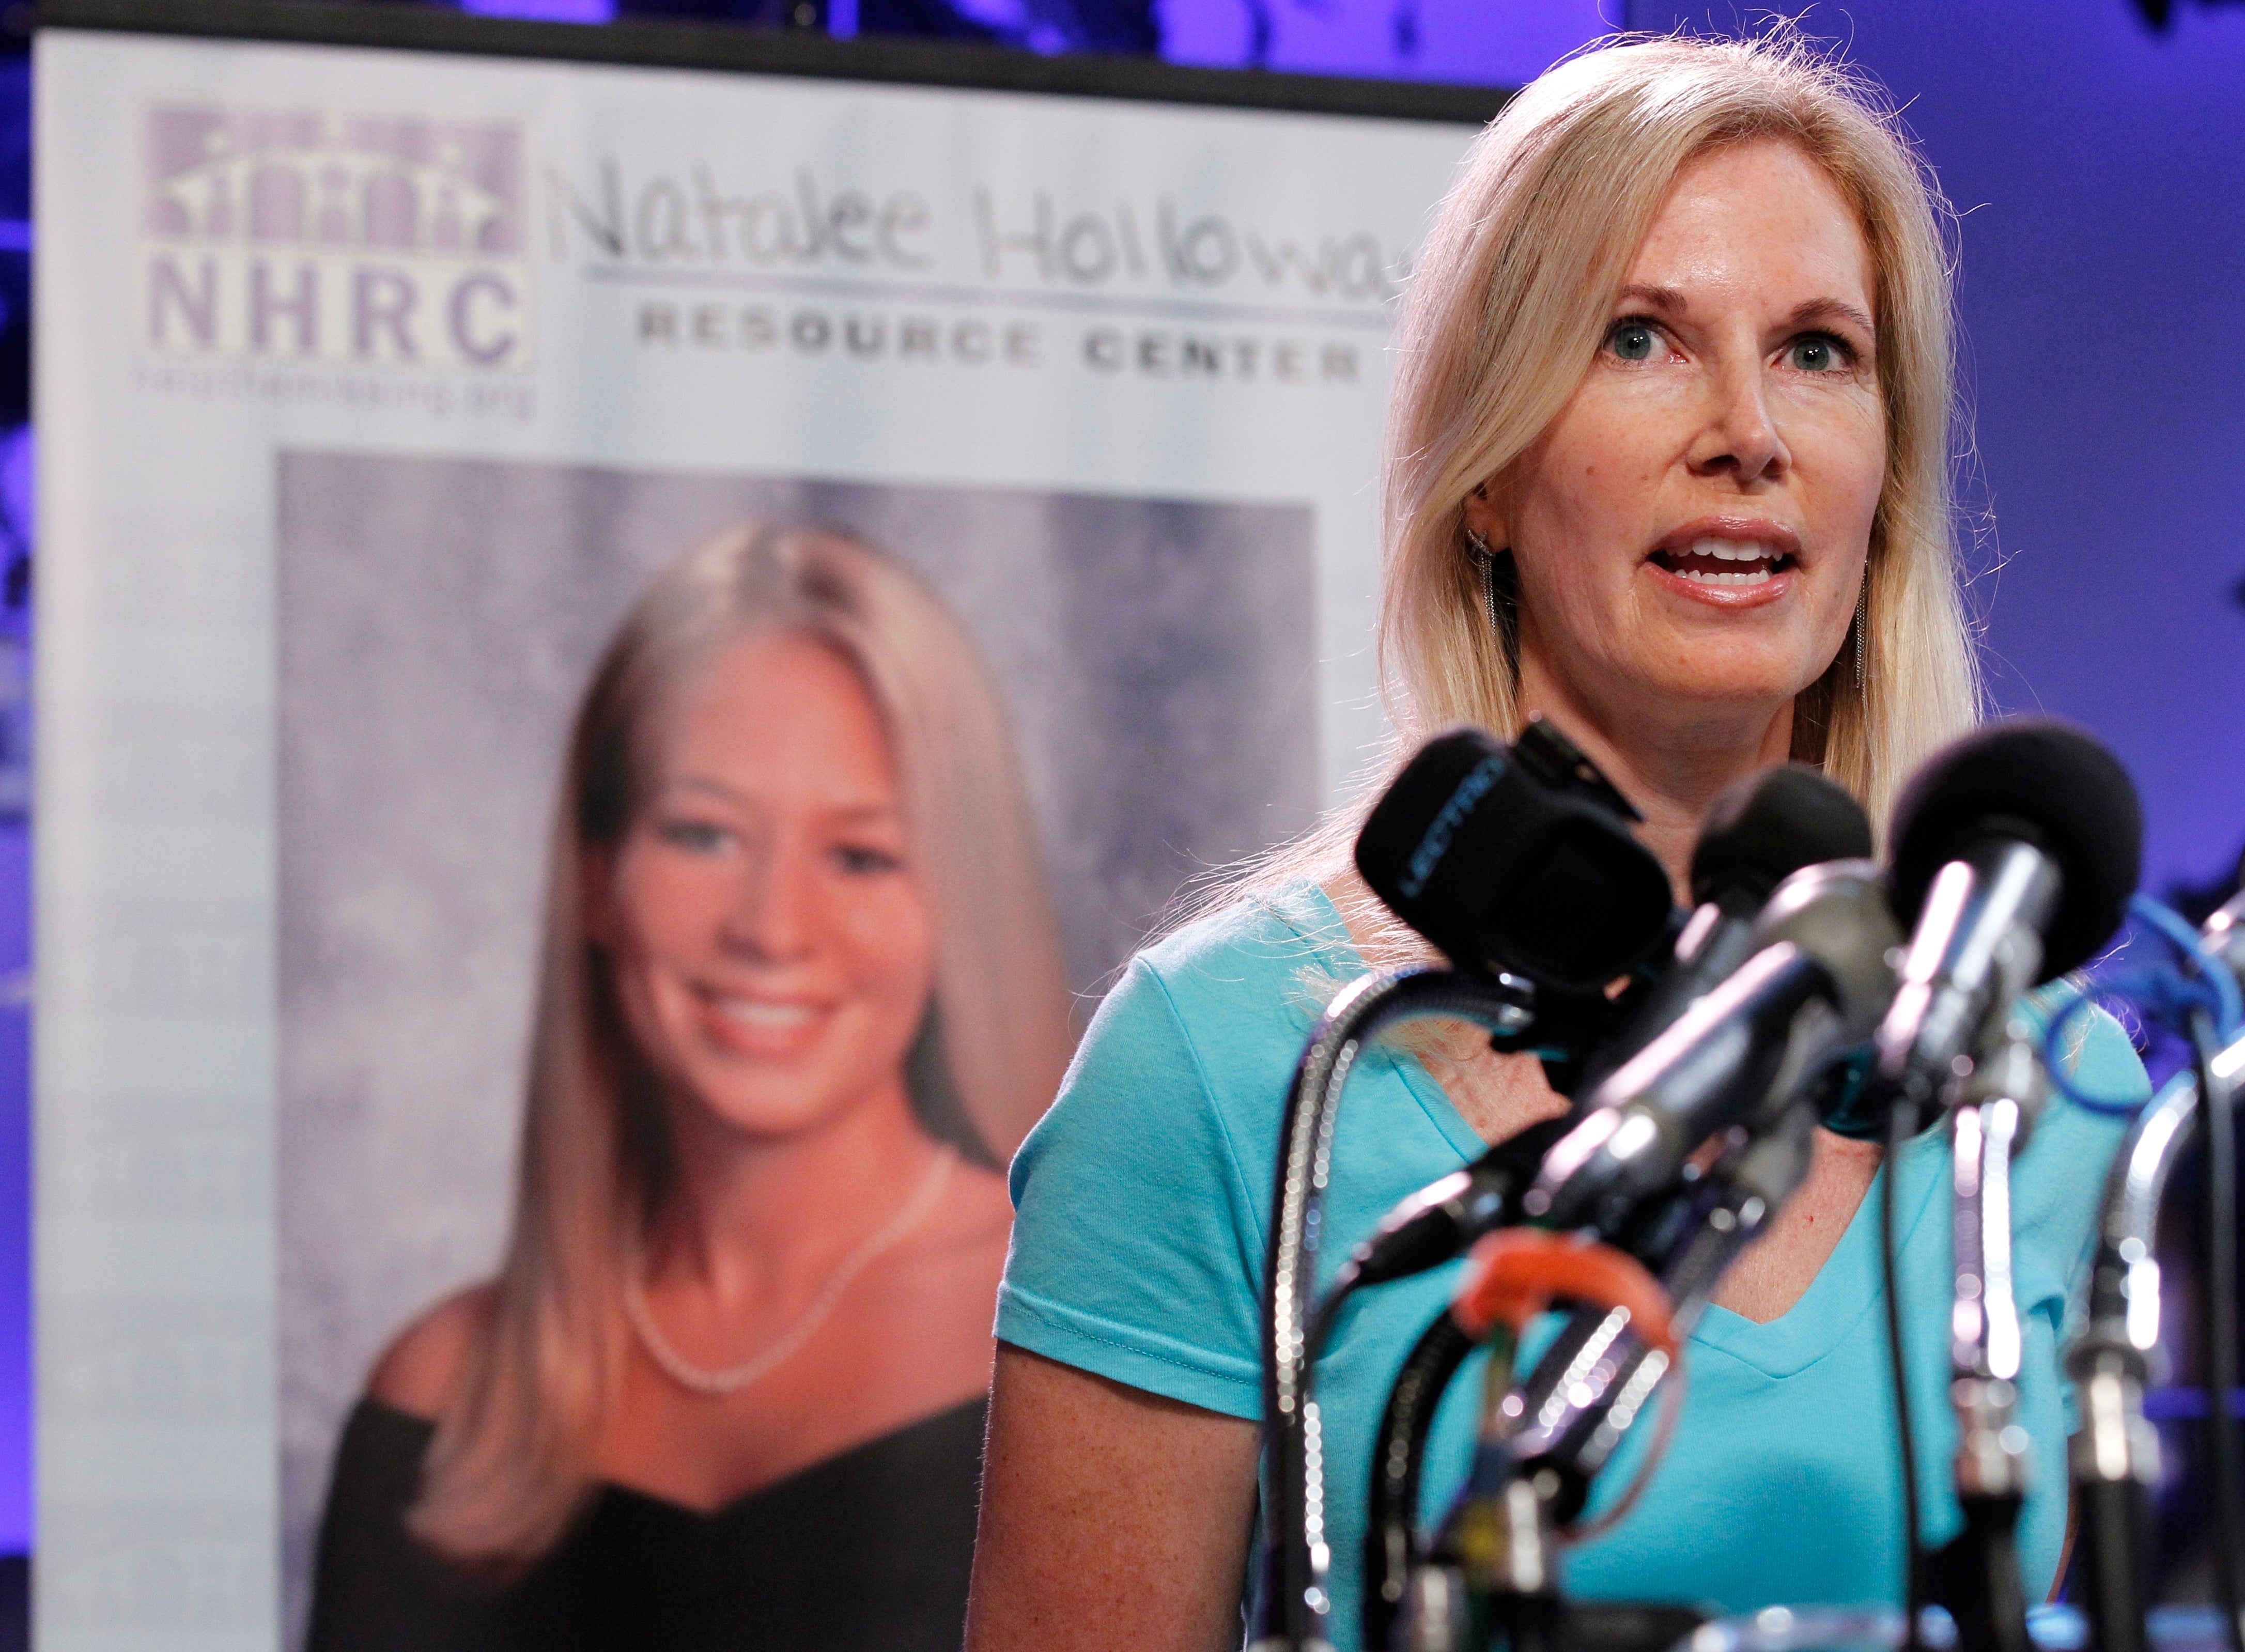 Beth Holloway has fought tirelessly for answers and justice since her daughter’s 2005 disappearance